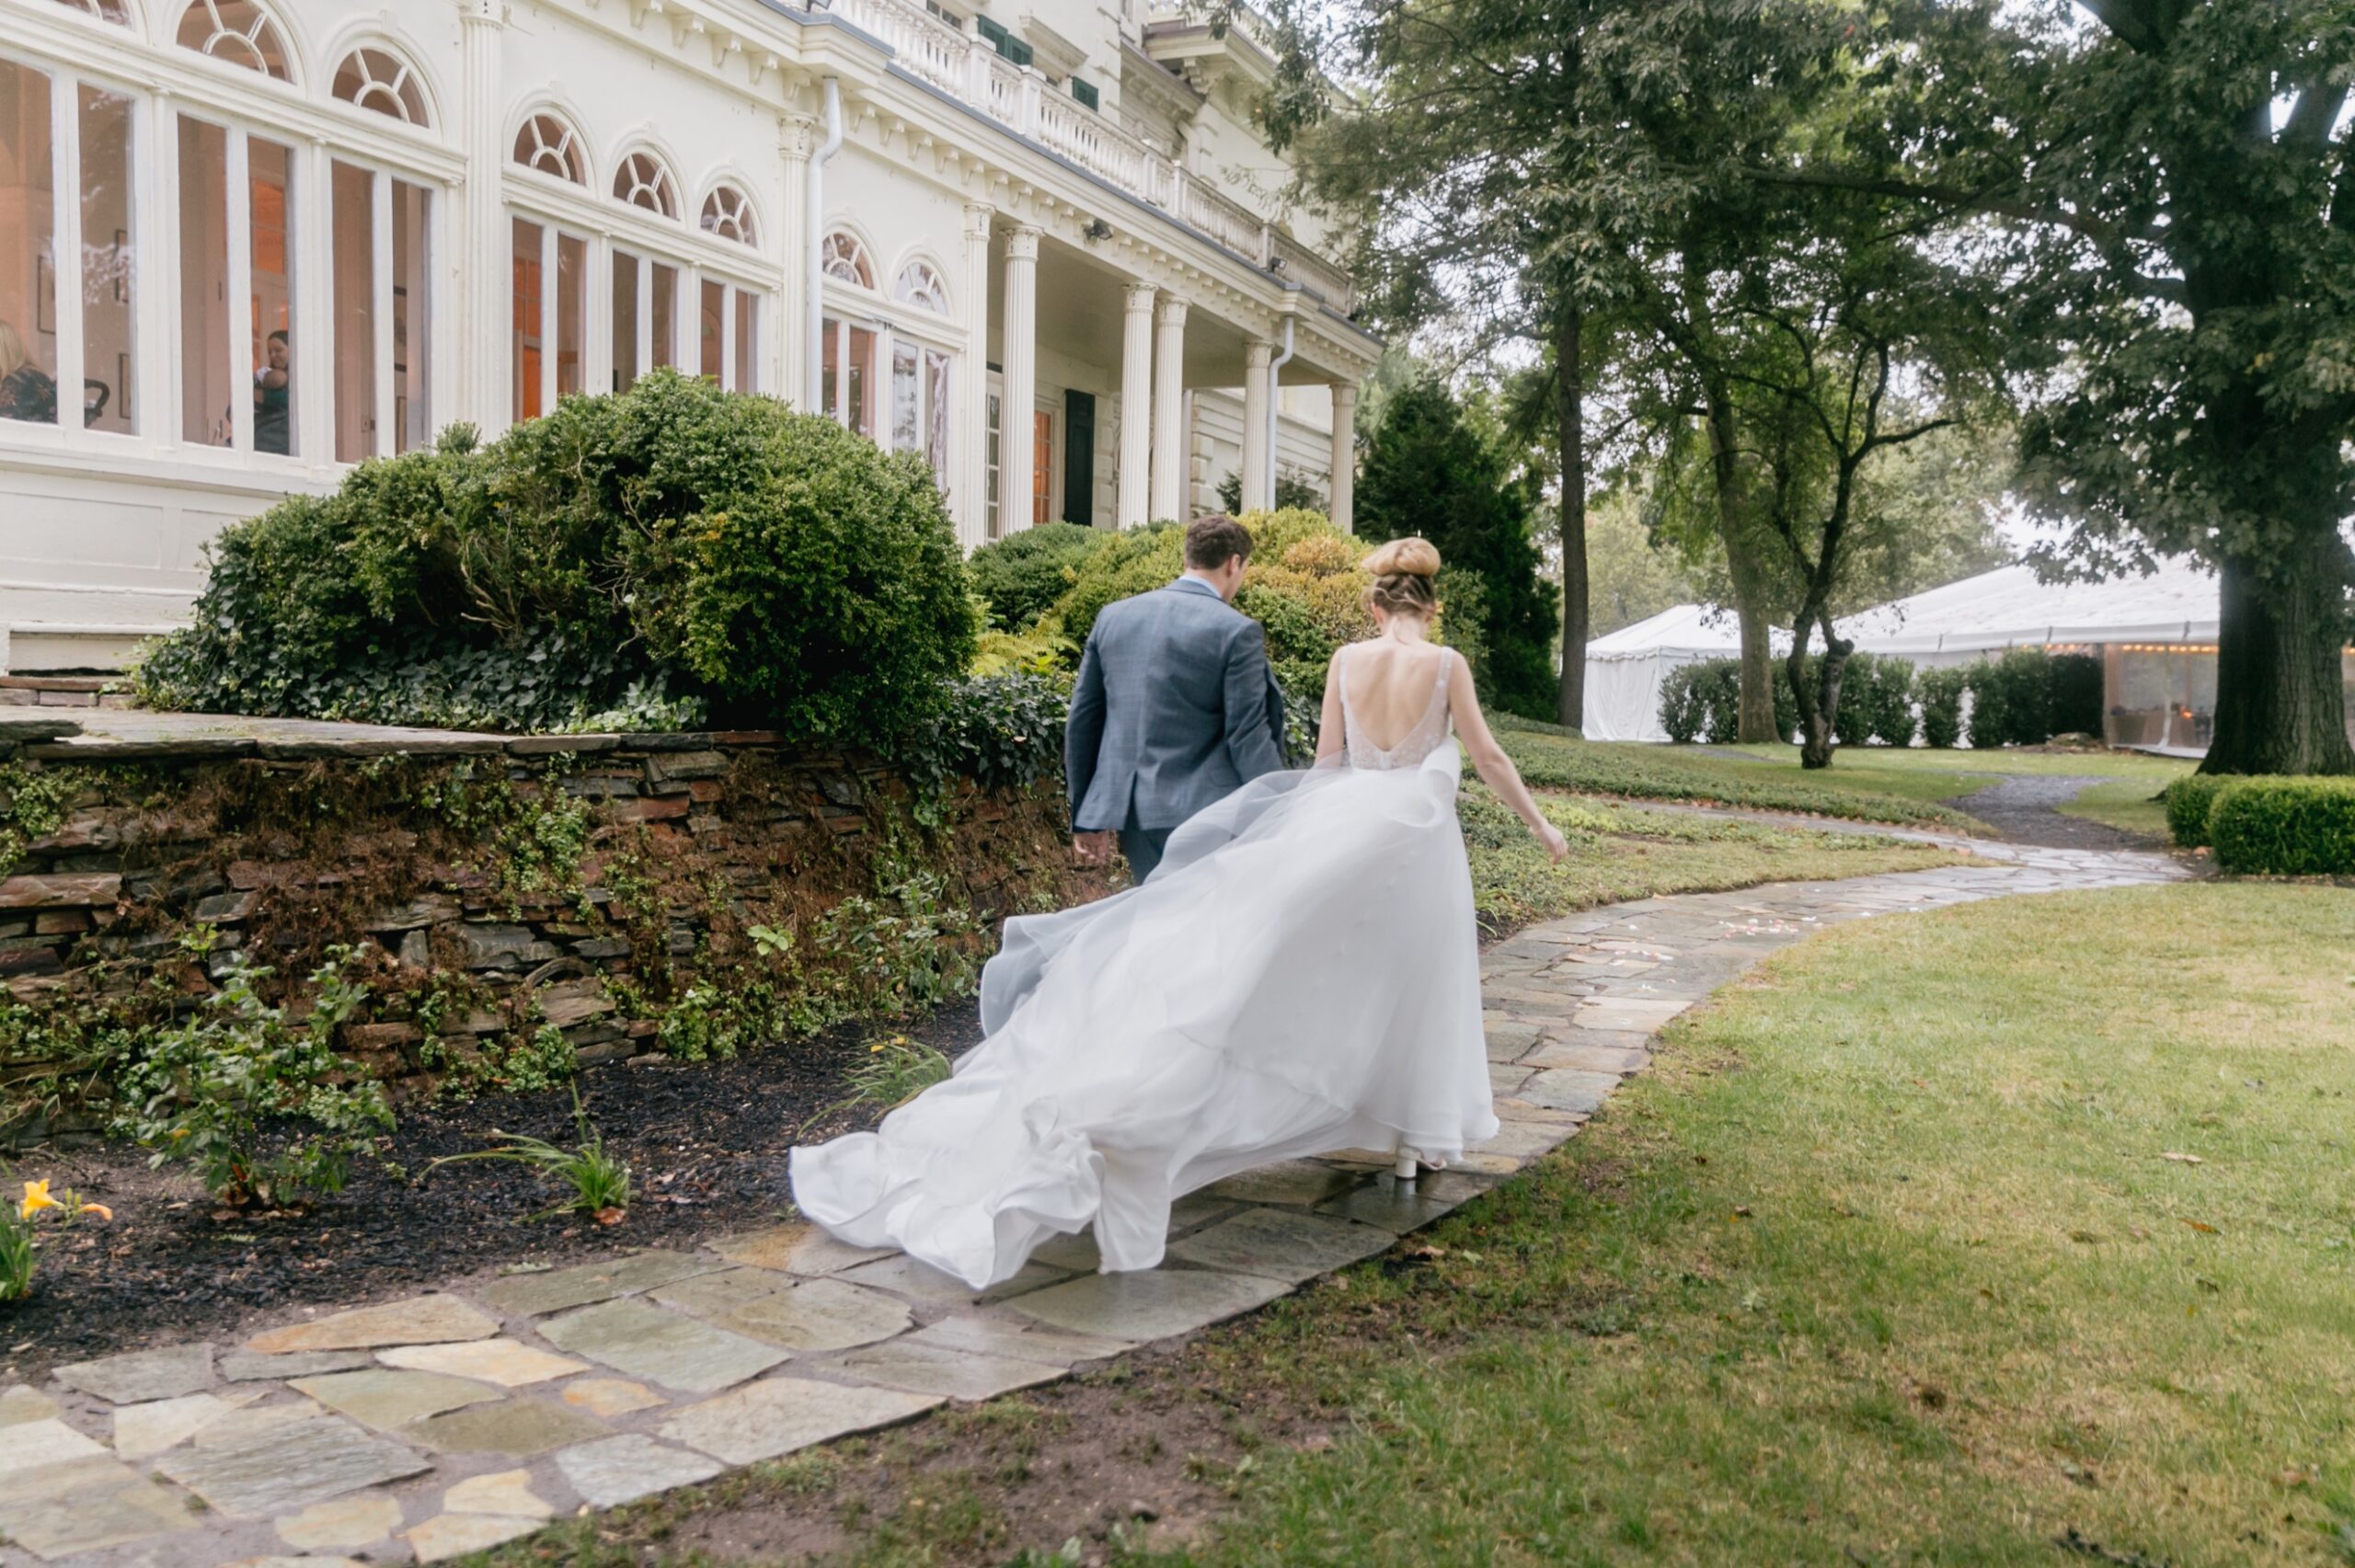 Riverside wedding ceremony at an estate wedding by Emily Wren Photography